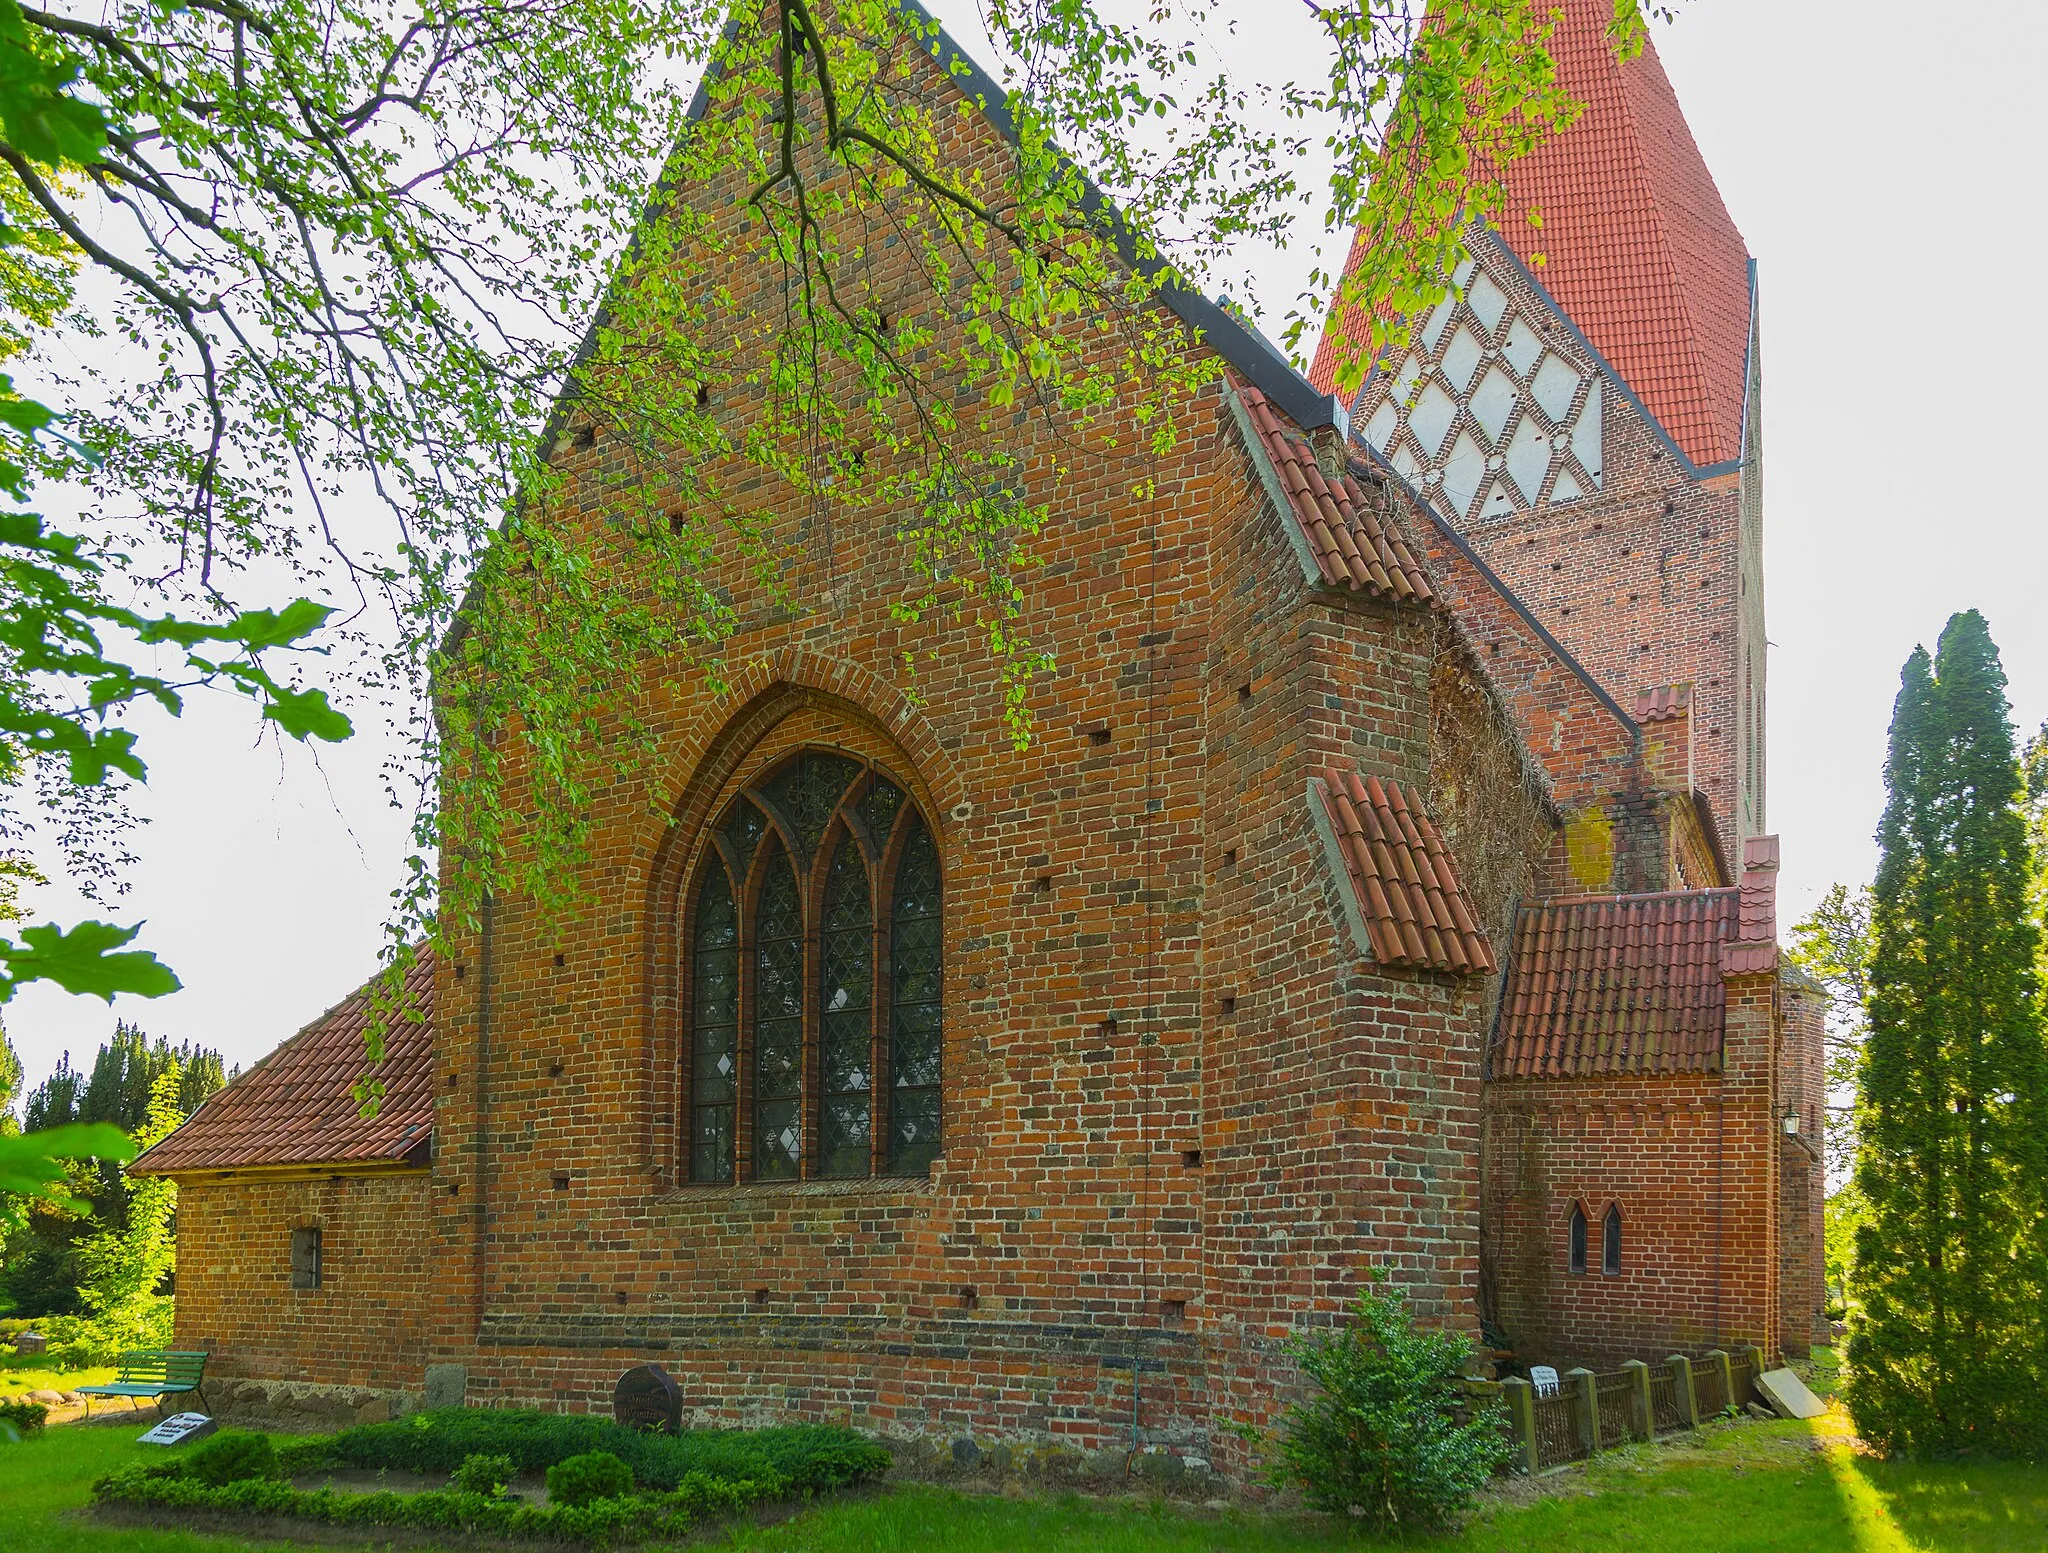 Photo showing: The Lutheran Village Church of Proseken, district of Gägelow, Landkreis Nordwestmecklenburg, Mecklenburg-Vorpommern, Germany. The church is a listed cultural heritage monument.